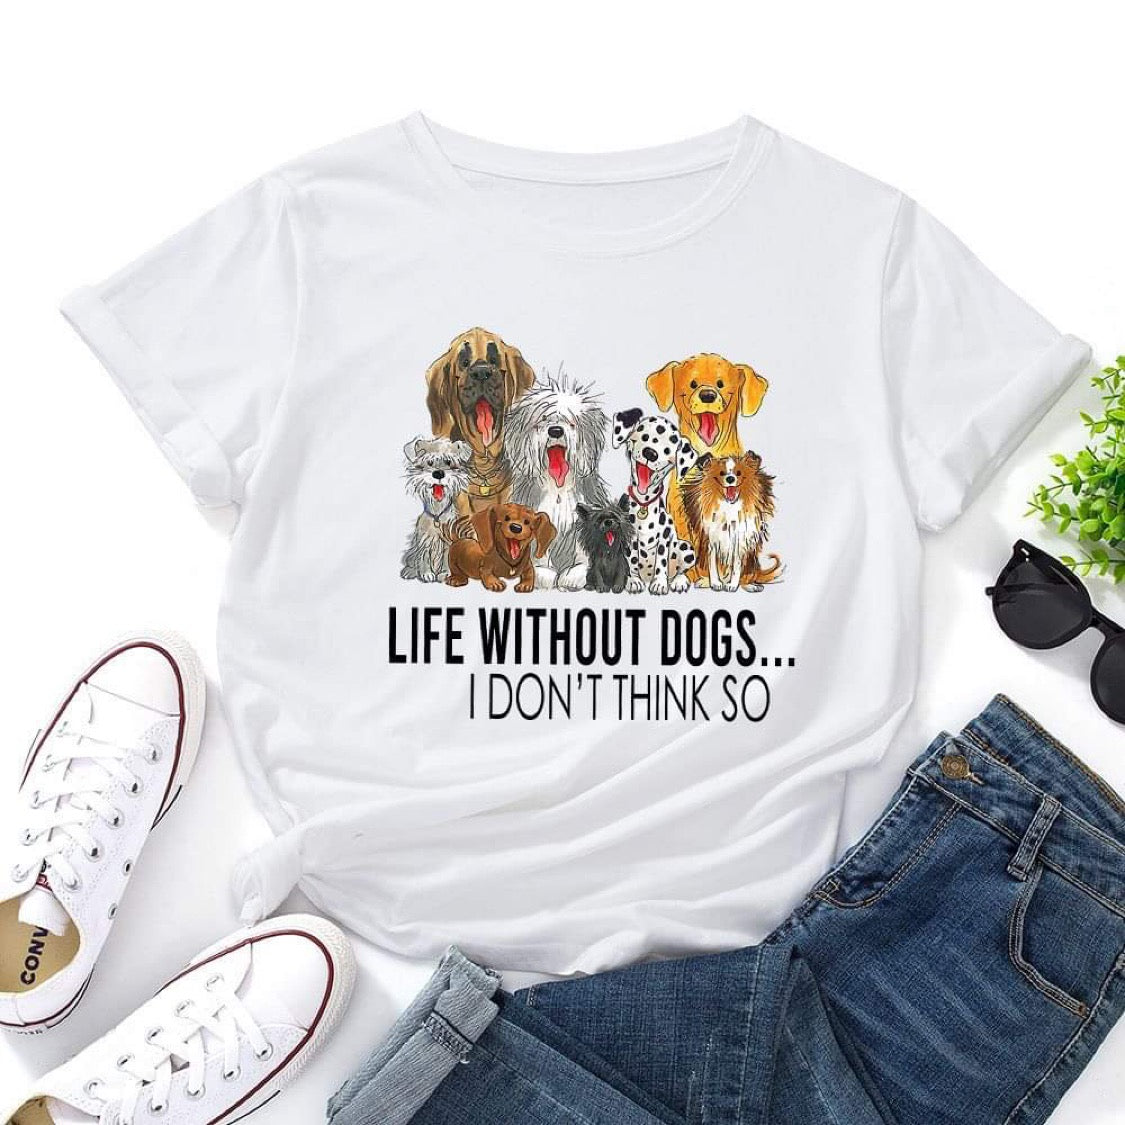 LIFE WITHOUT DOGS.. I DON'T THINK SO T-SHIRT